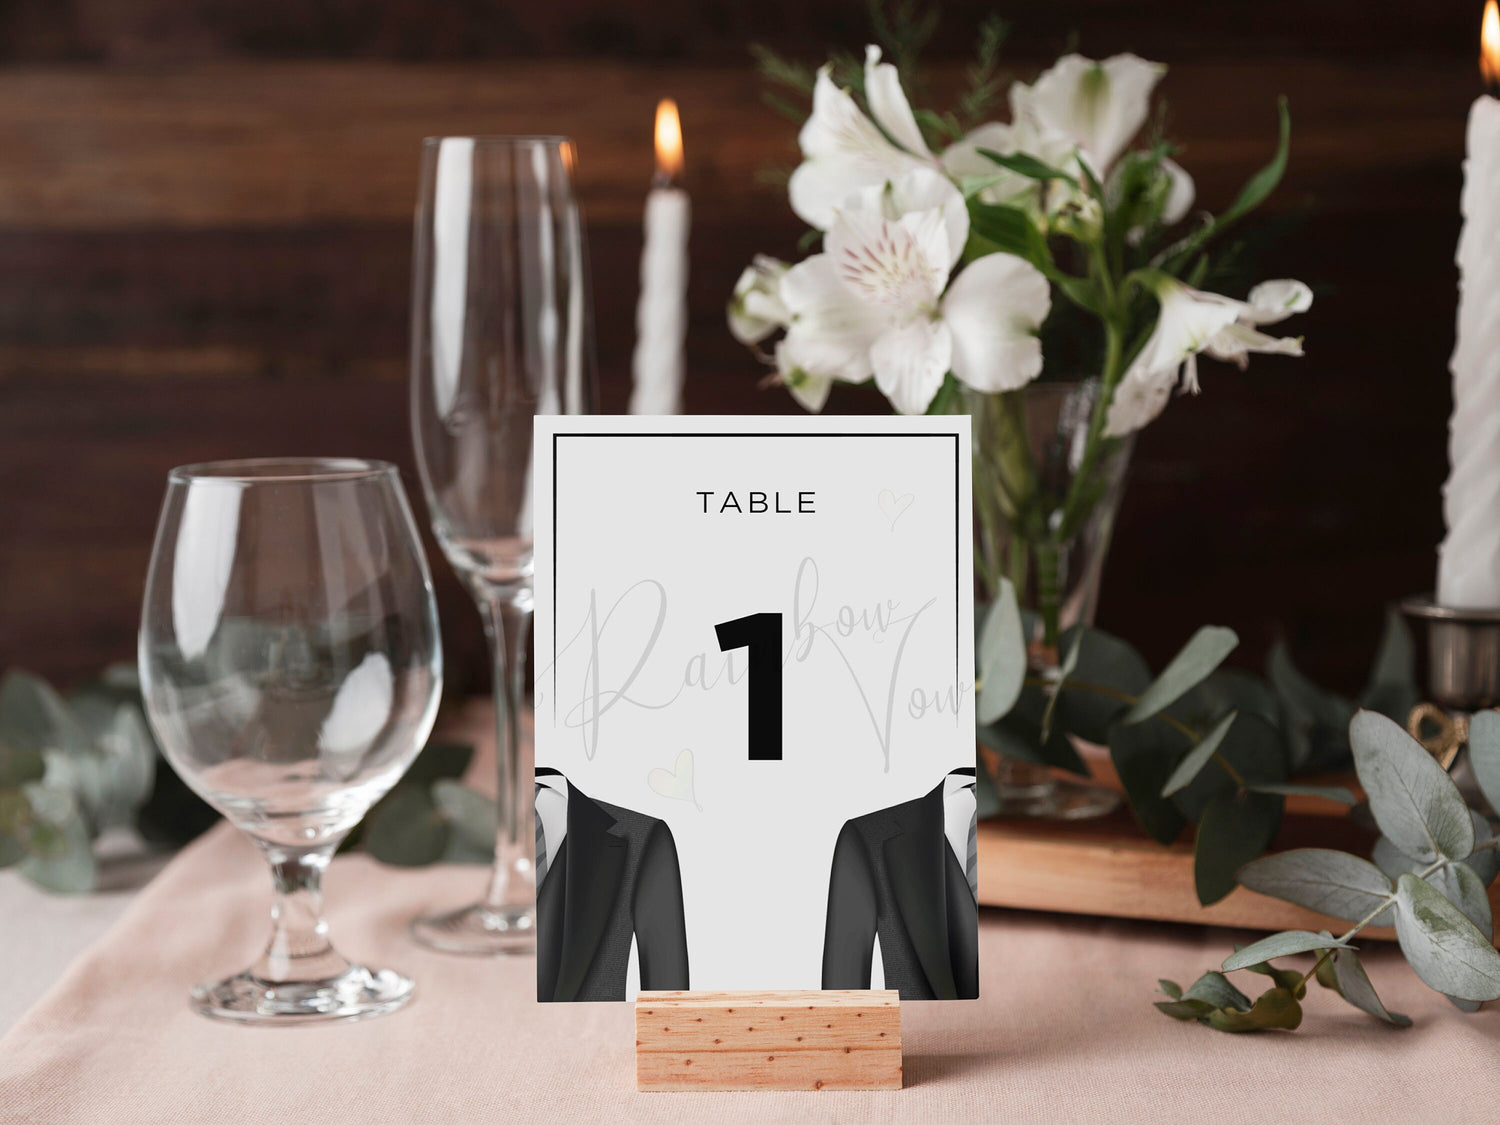 Table numbers for weddings, printable photo table numbers, editable templates for table numbers, wedding signage, and wedding numbers